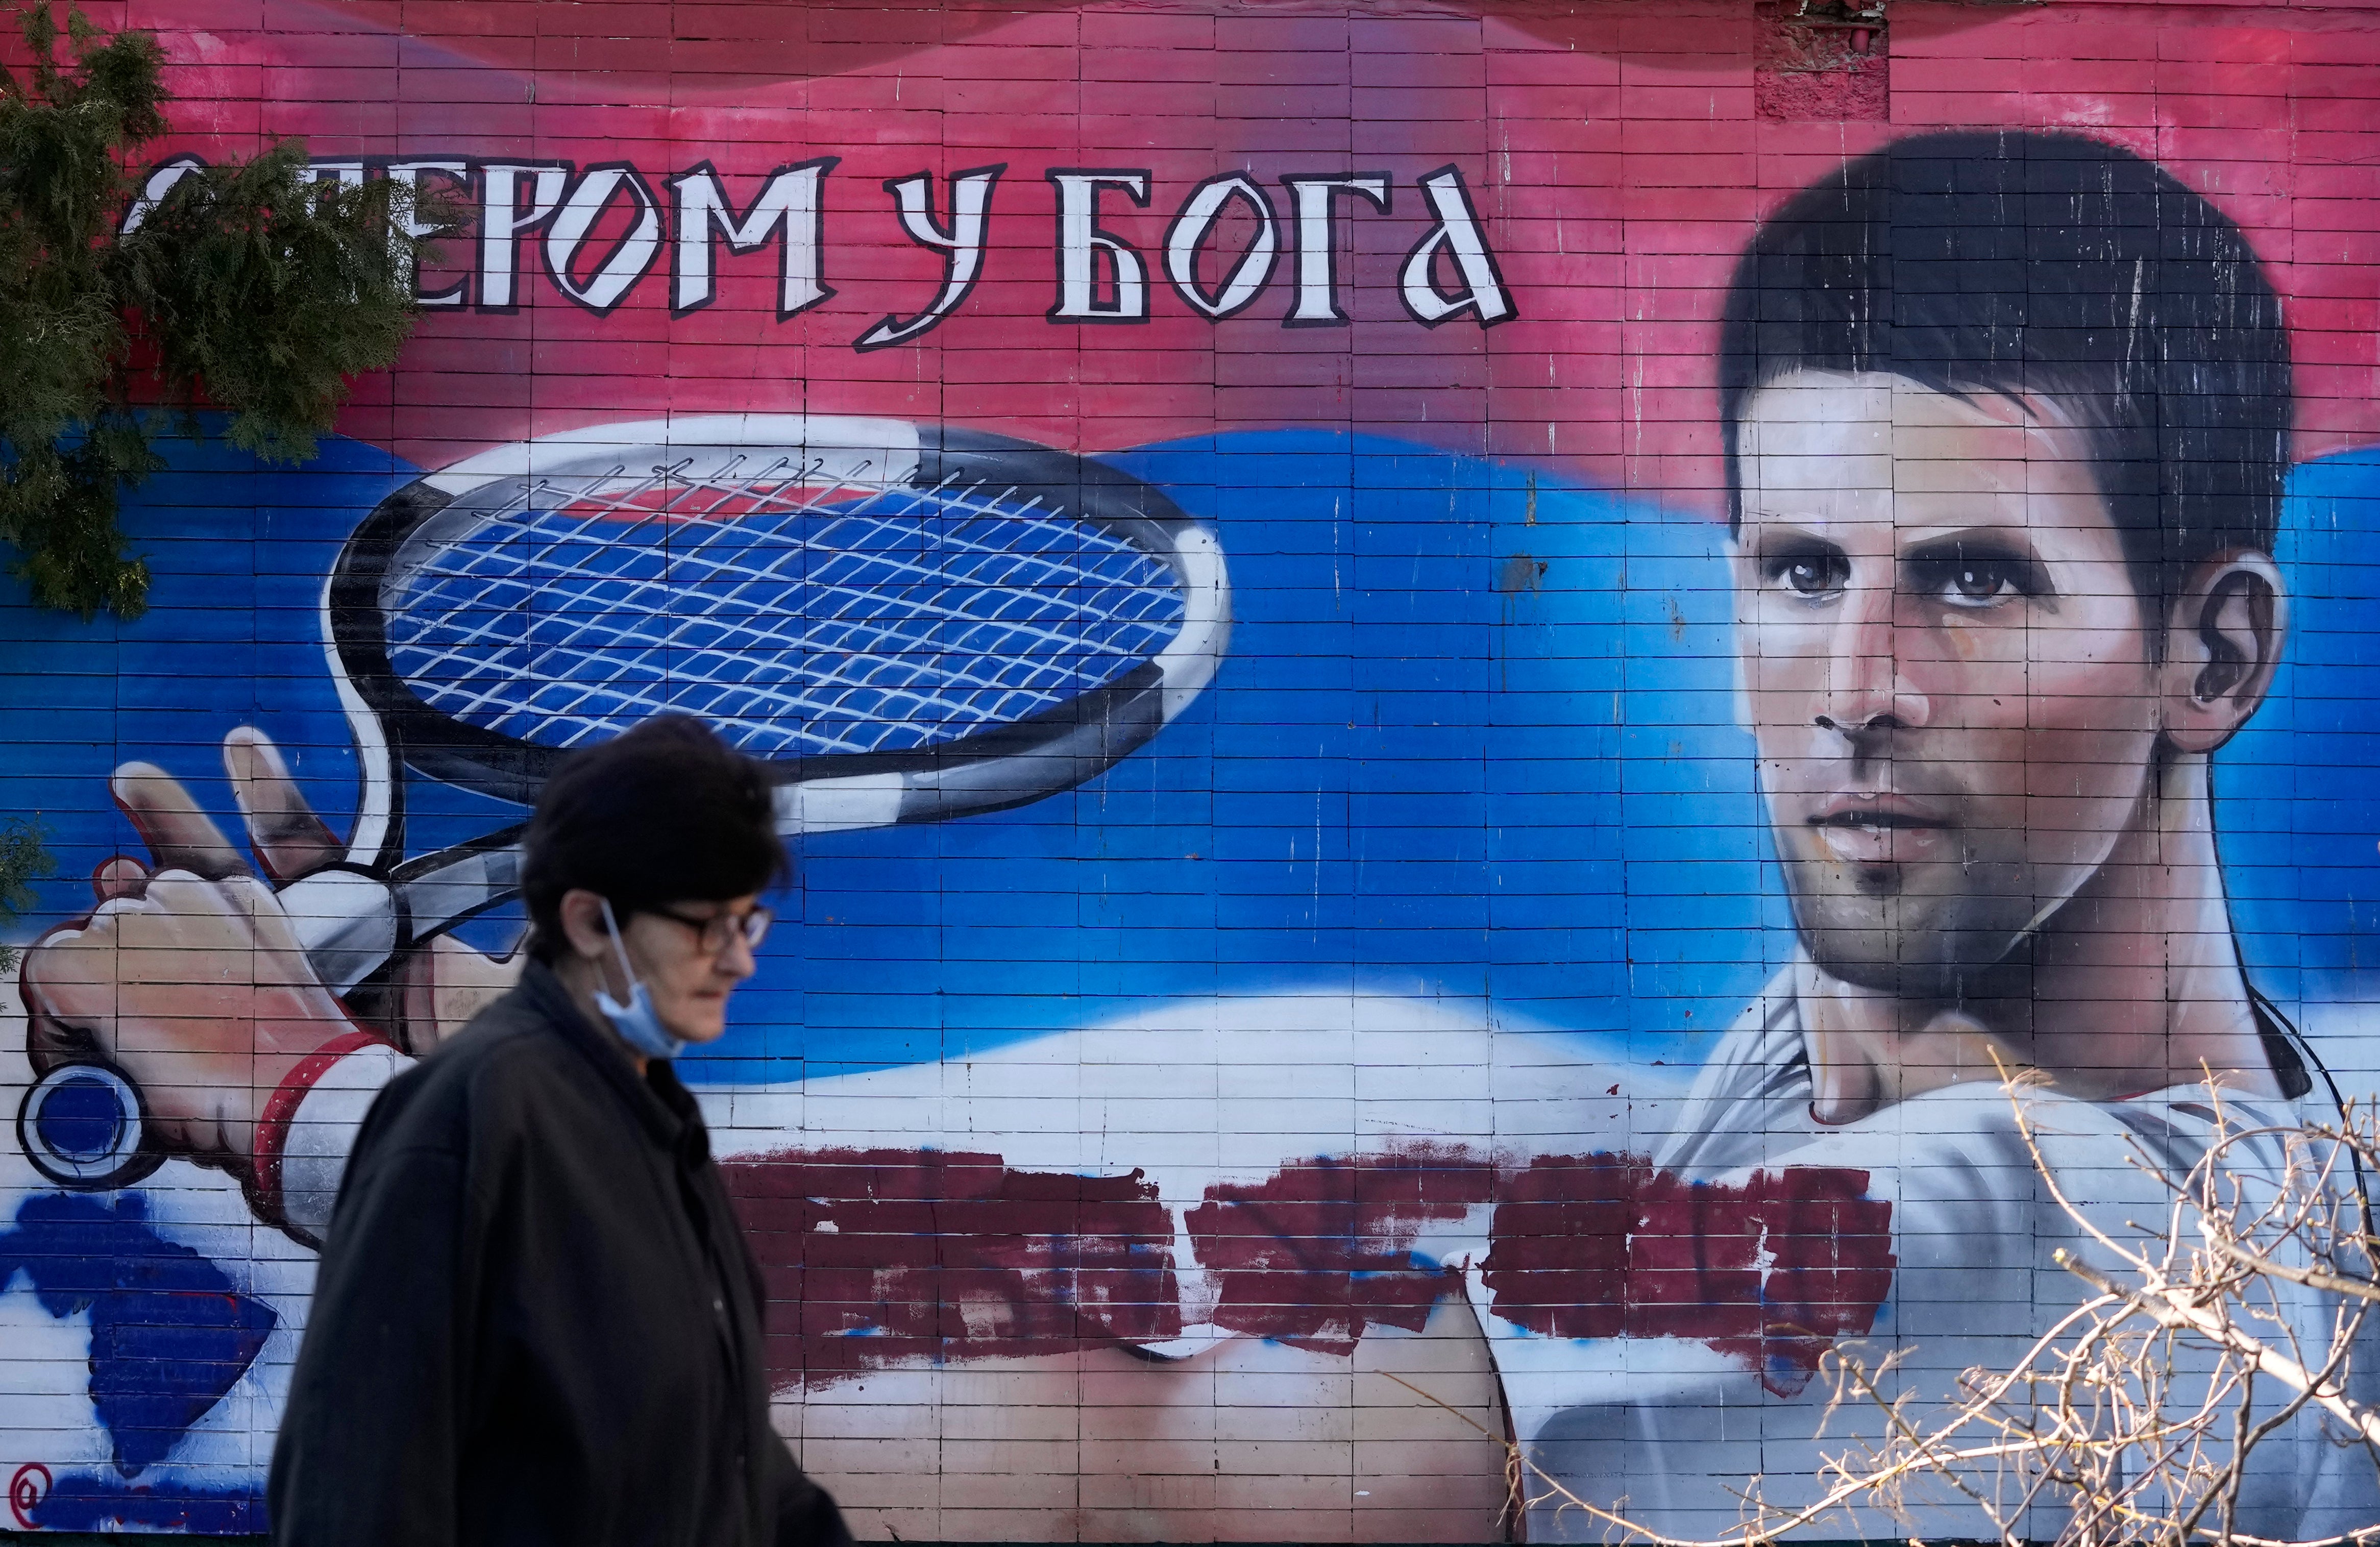 A woman passes a mural depicting Serbian tennis player Novak Djokovic, reading: “With faith in God” on a wall in Belgrade. Djokovic was deported from Australia on Sunday after failing to overturn the decision to cancel his visa (Darko Vojinovic/AP)